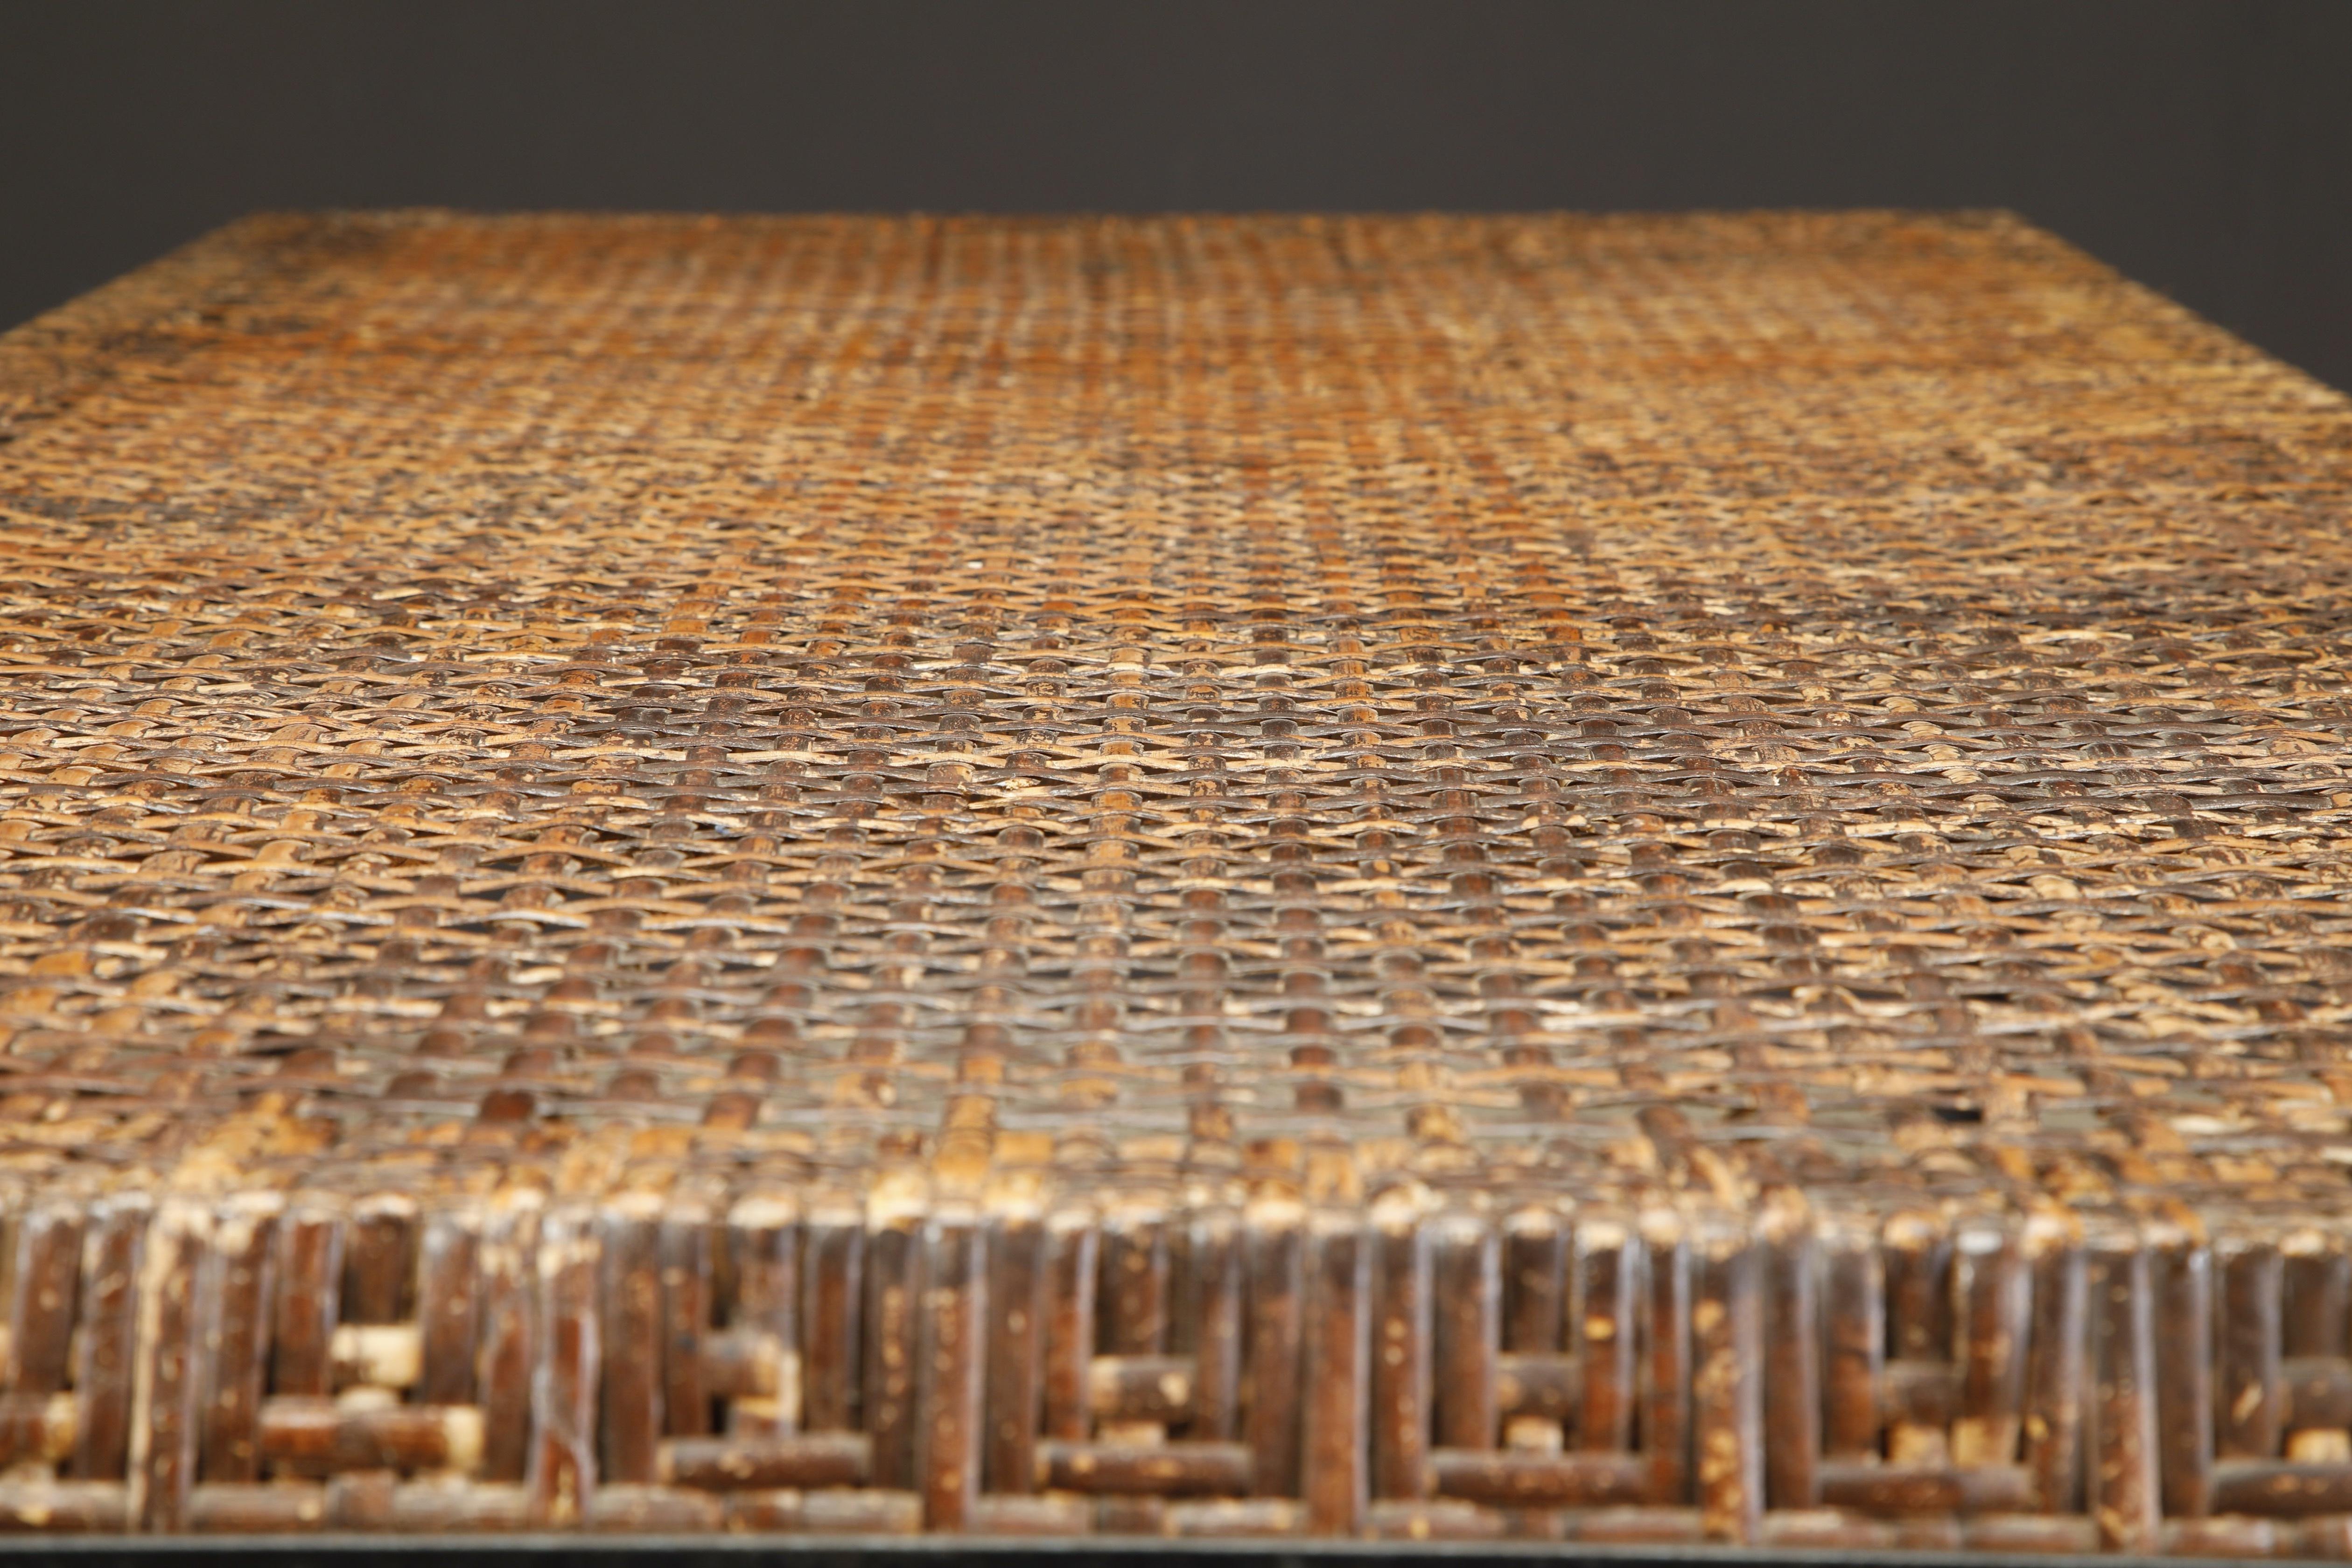 Caned Dining Table by Danny Ho Fong for Tropi-cal in Iron and Rattan, c 1960s For Sale 12